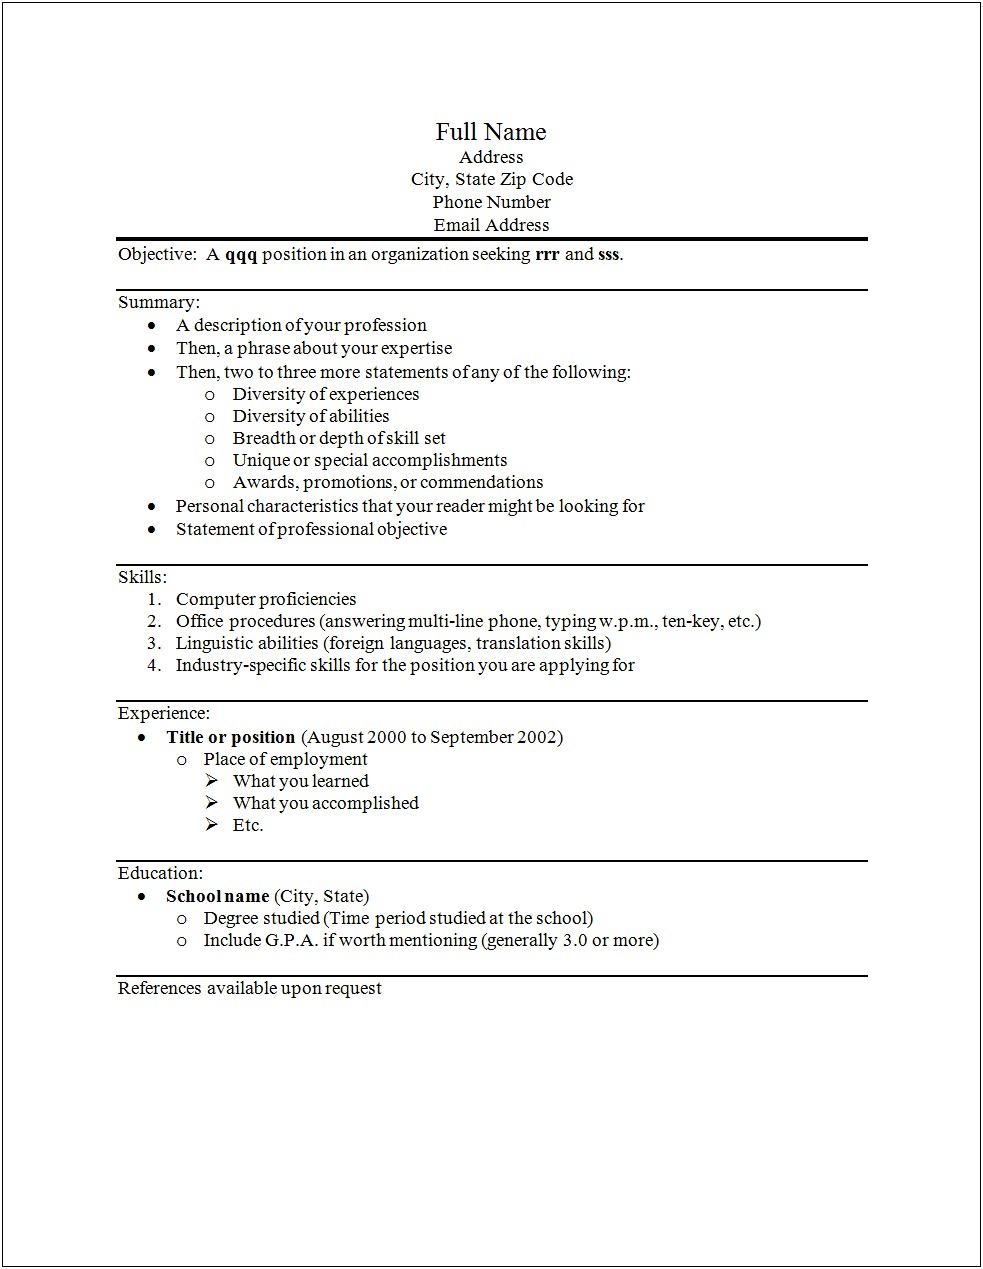 Additional Experience References Avaiable Upon Request Resume